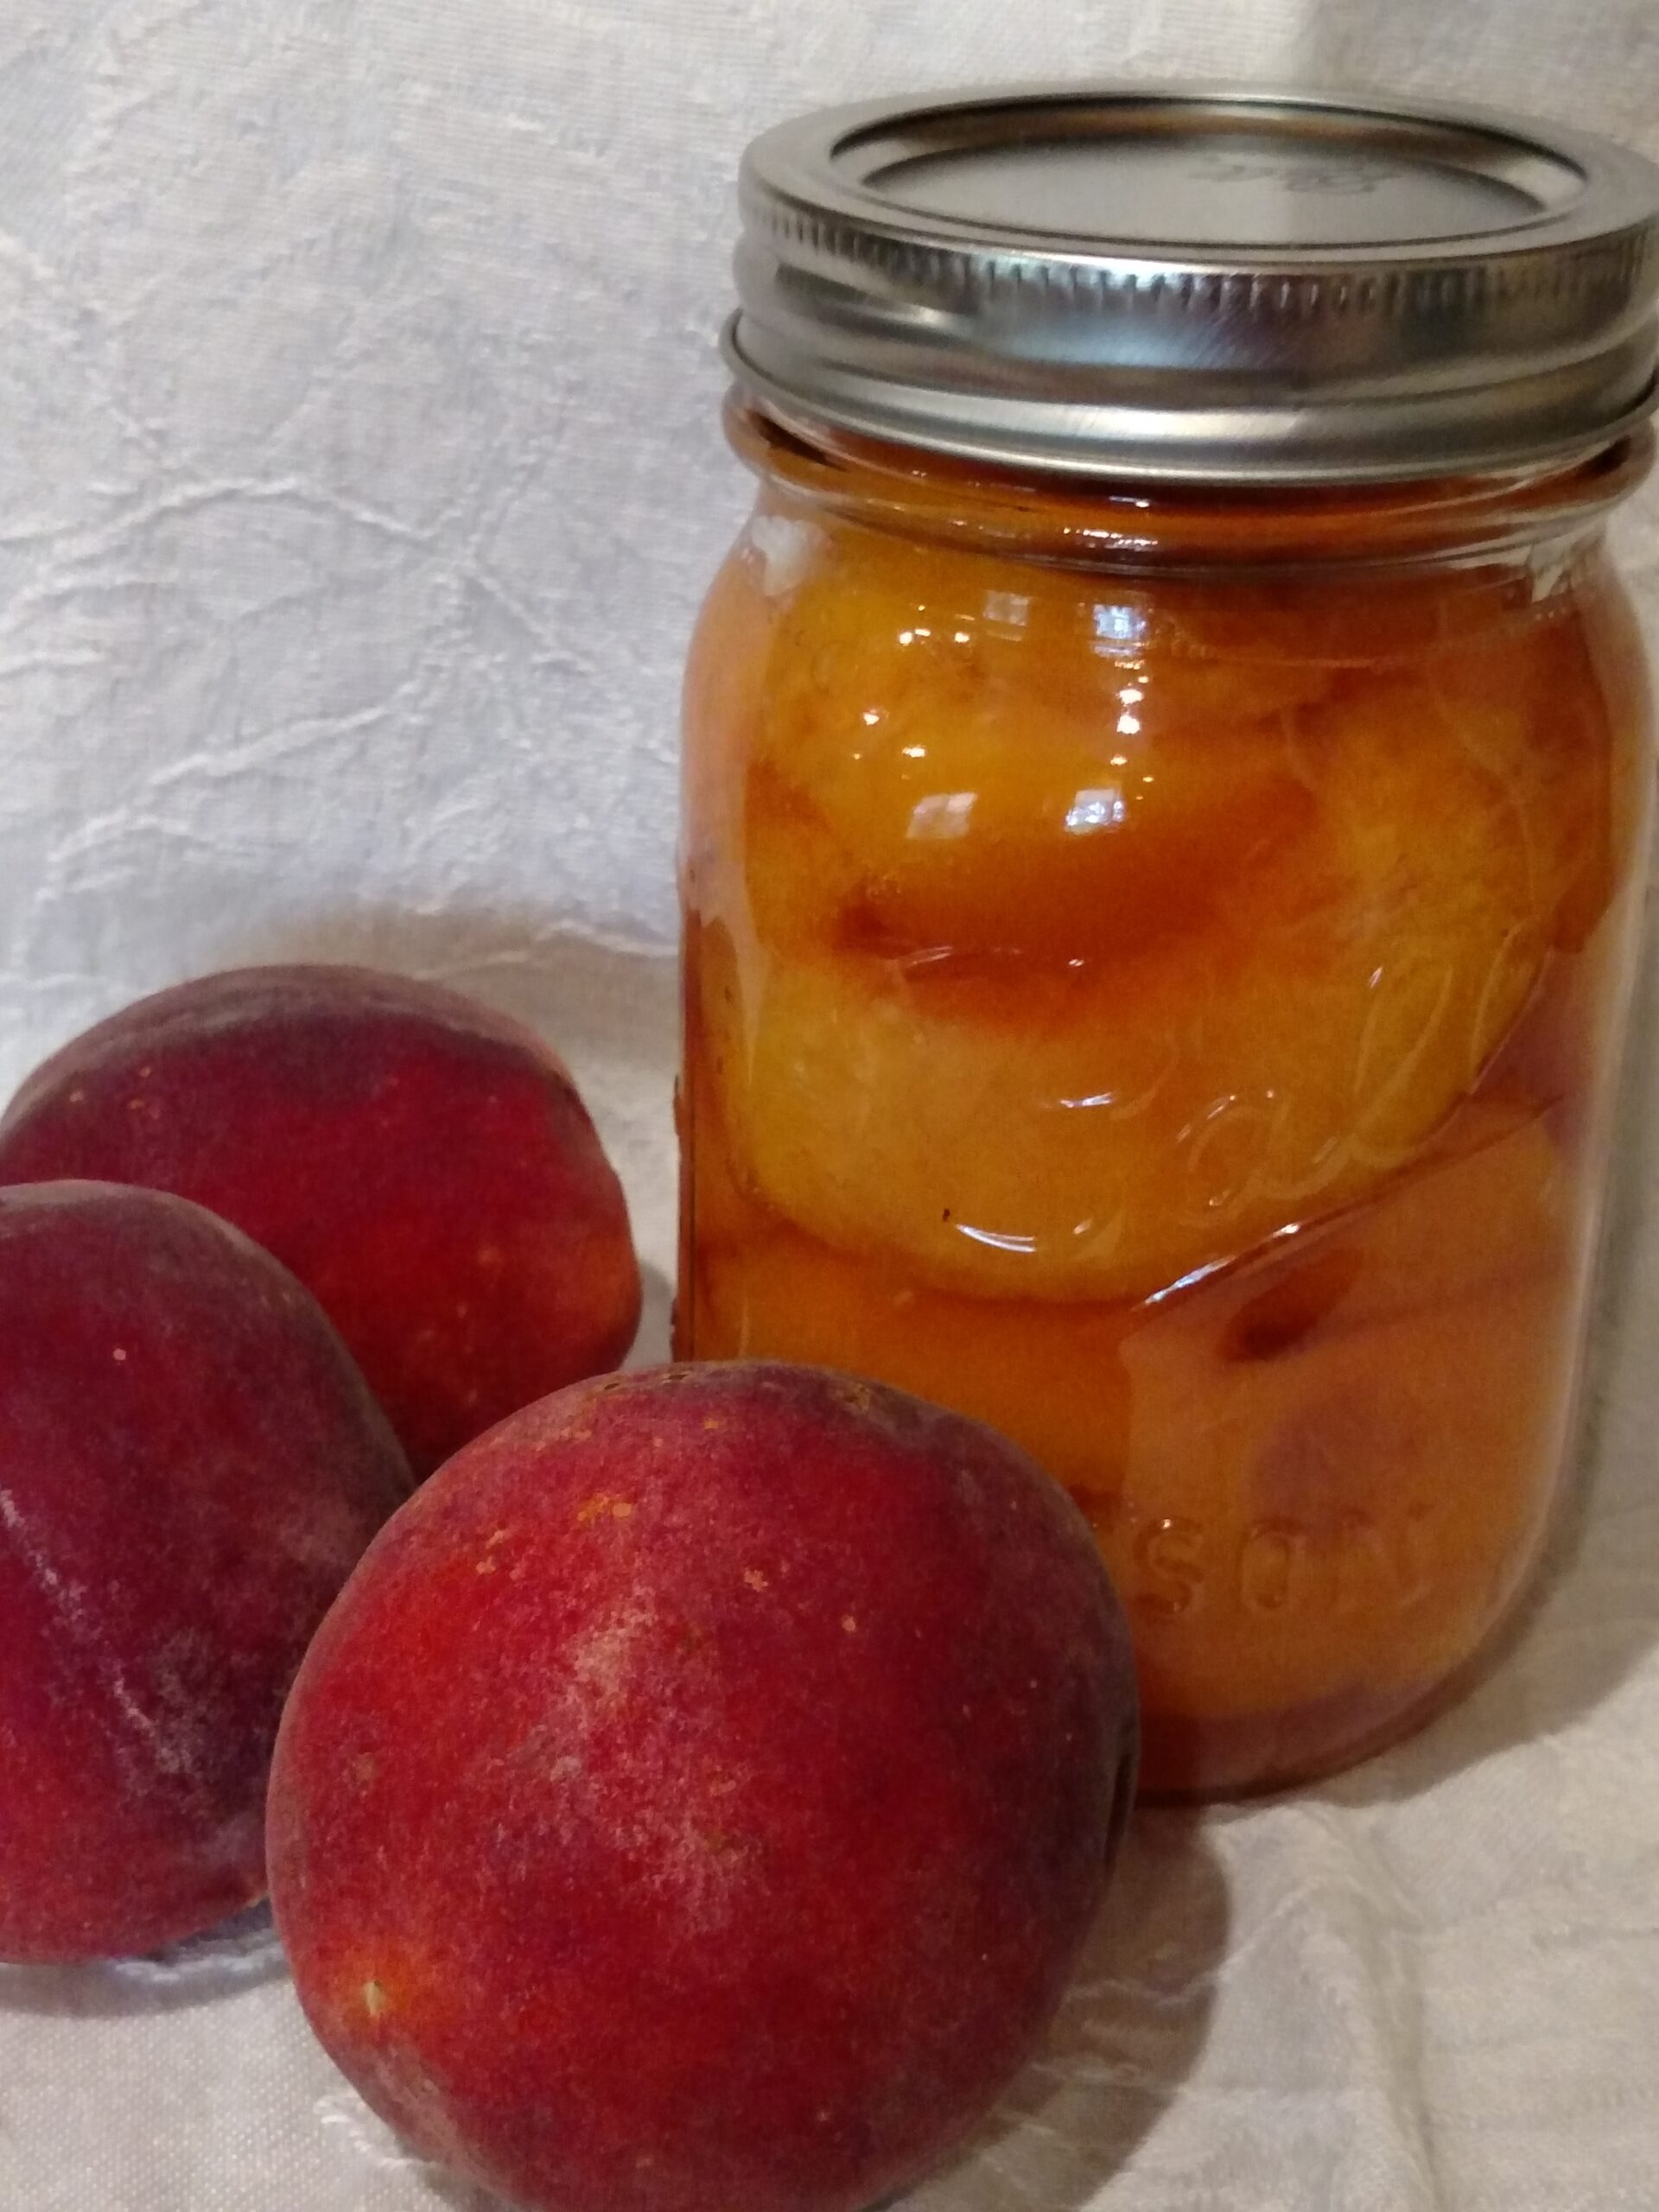 1 pint jar of home canned peaches and 3 peaches next to it.